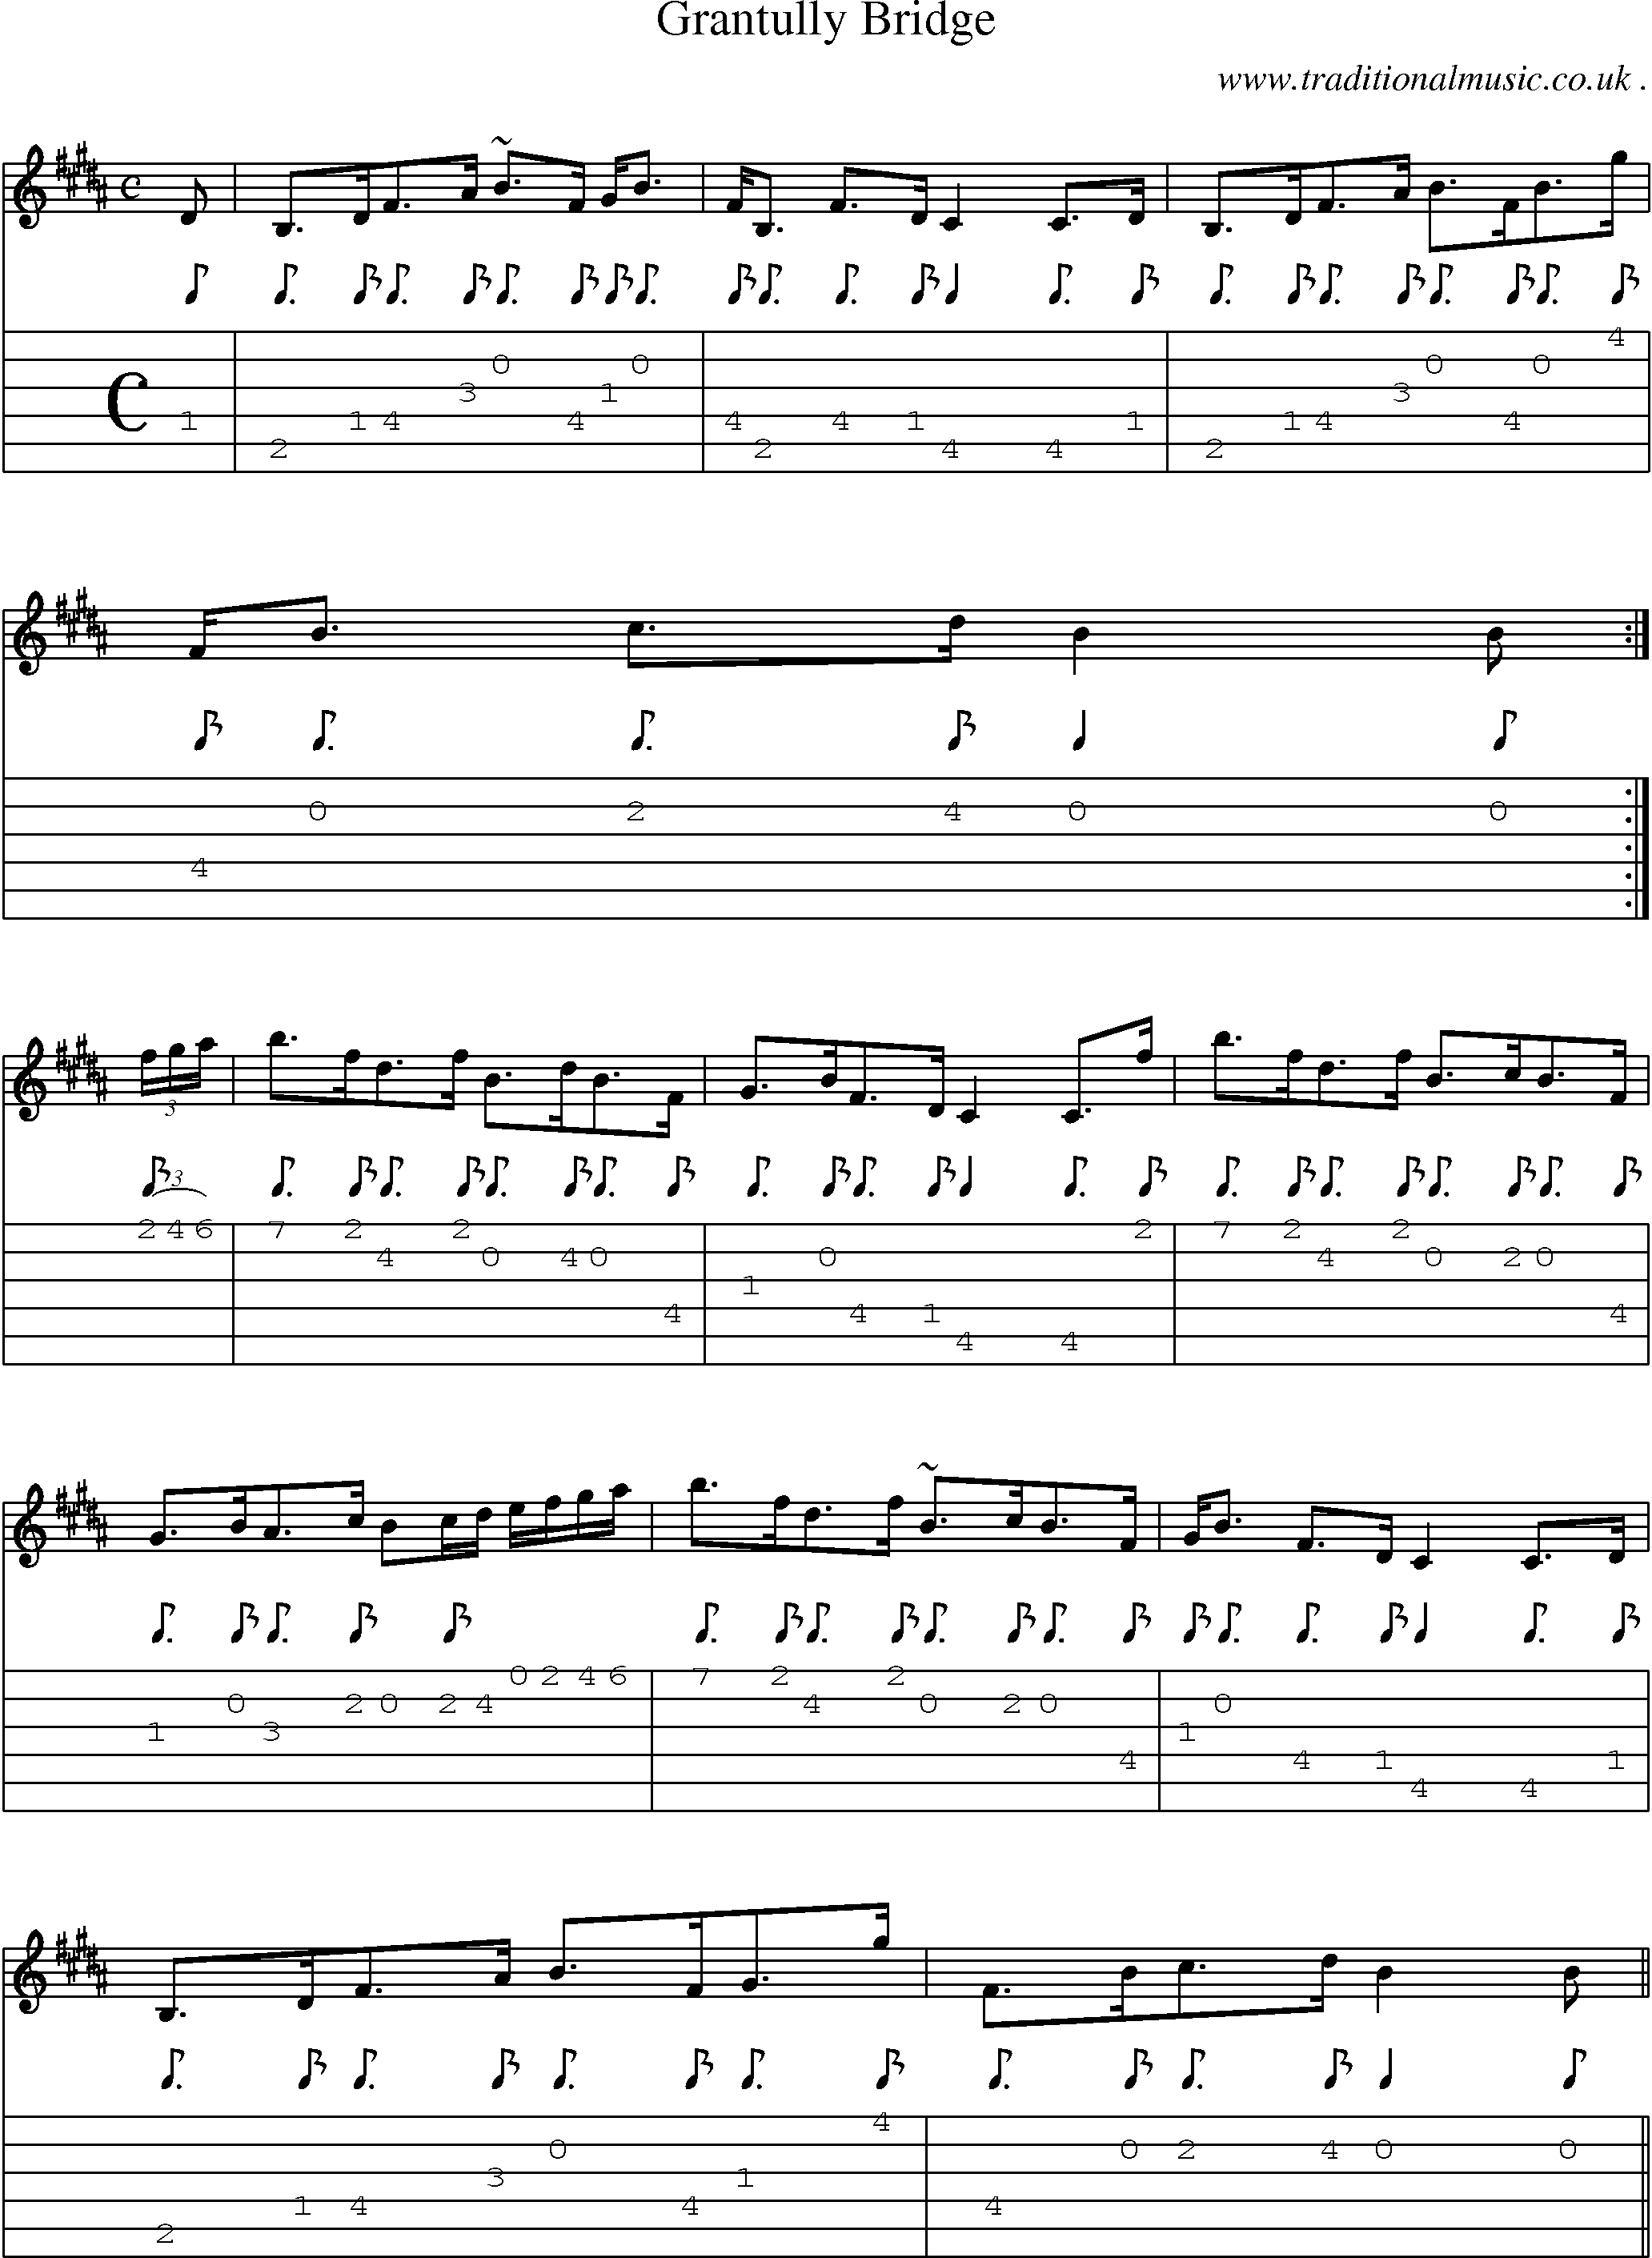 Sheet-music  score, Chords and Guitar Tabs for Grantully Bridge